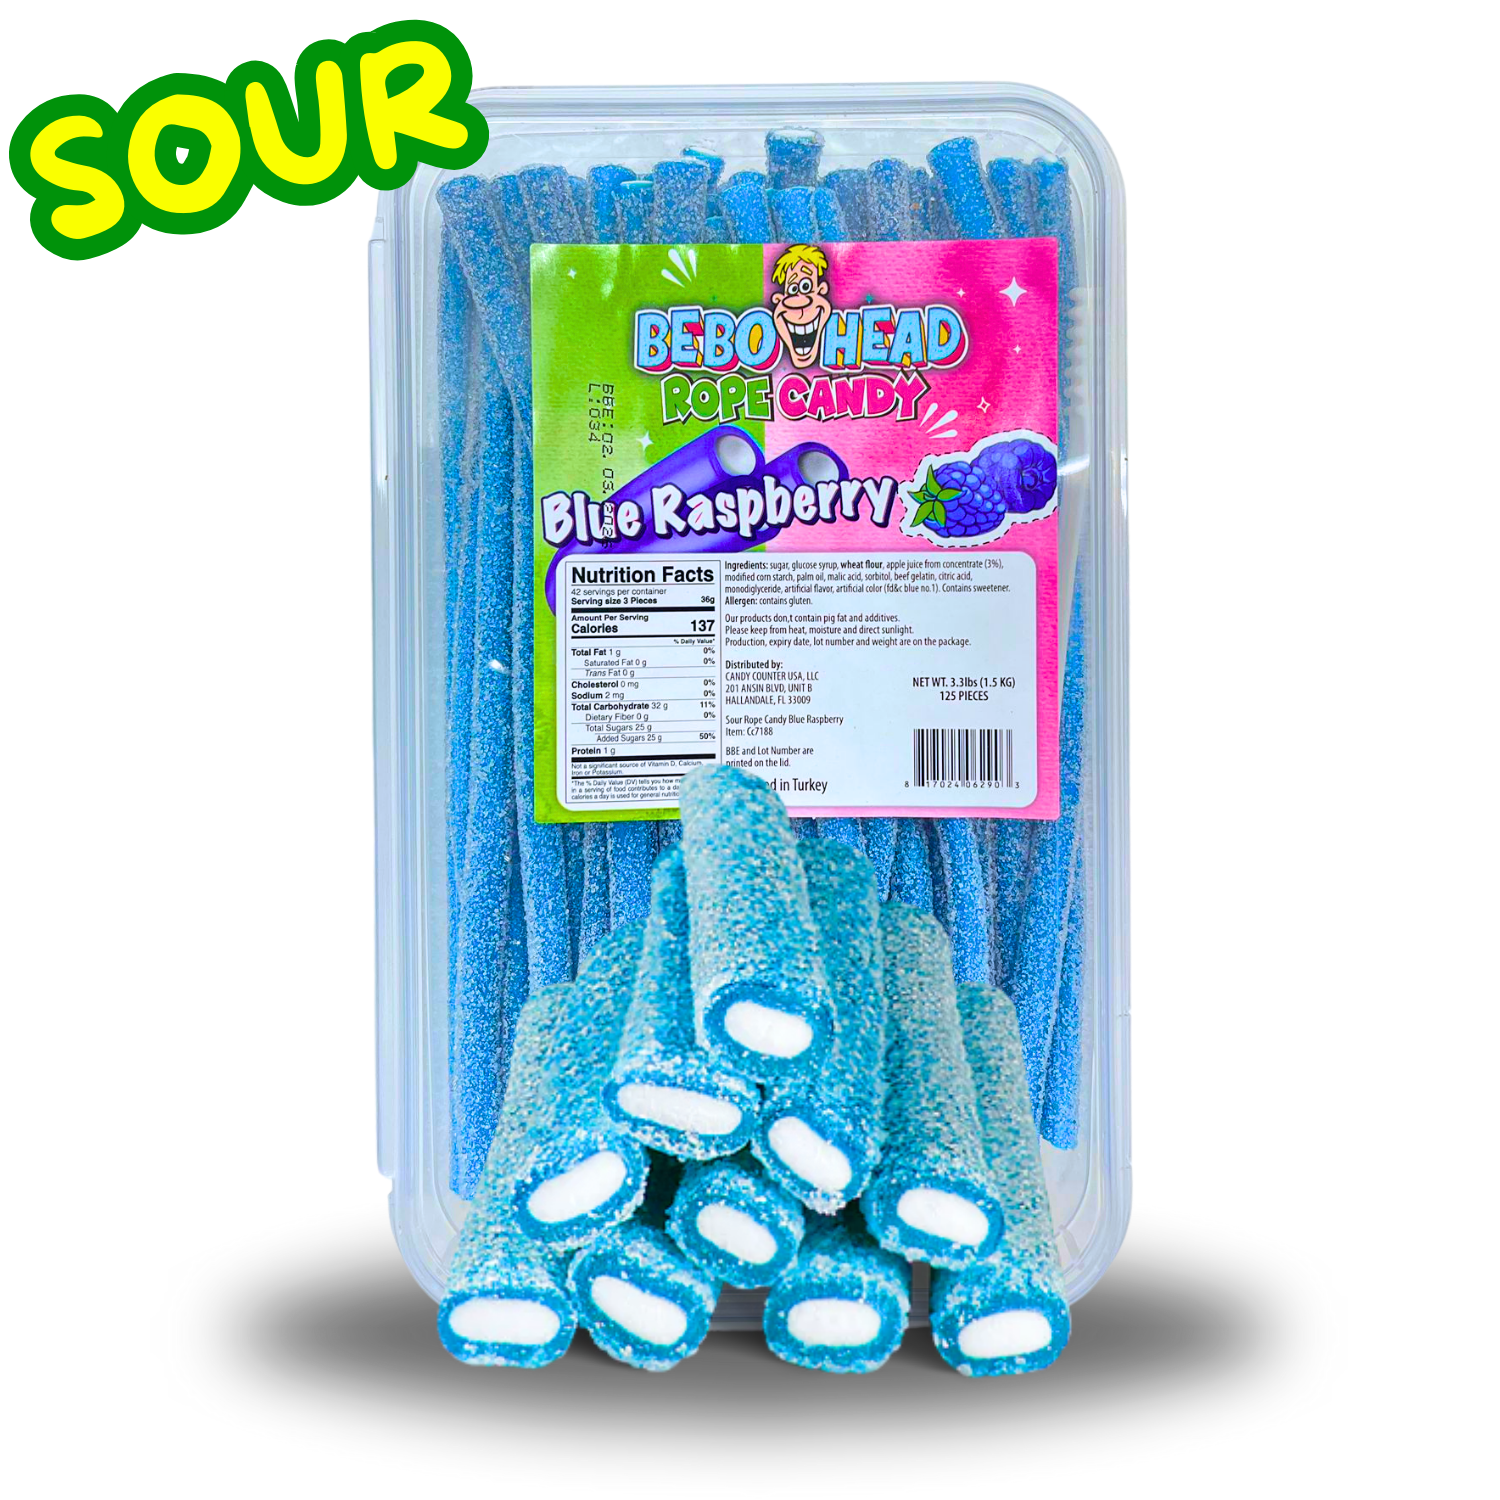 Blue Raspberry Sour Ropes - 3.3 Pounds